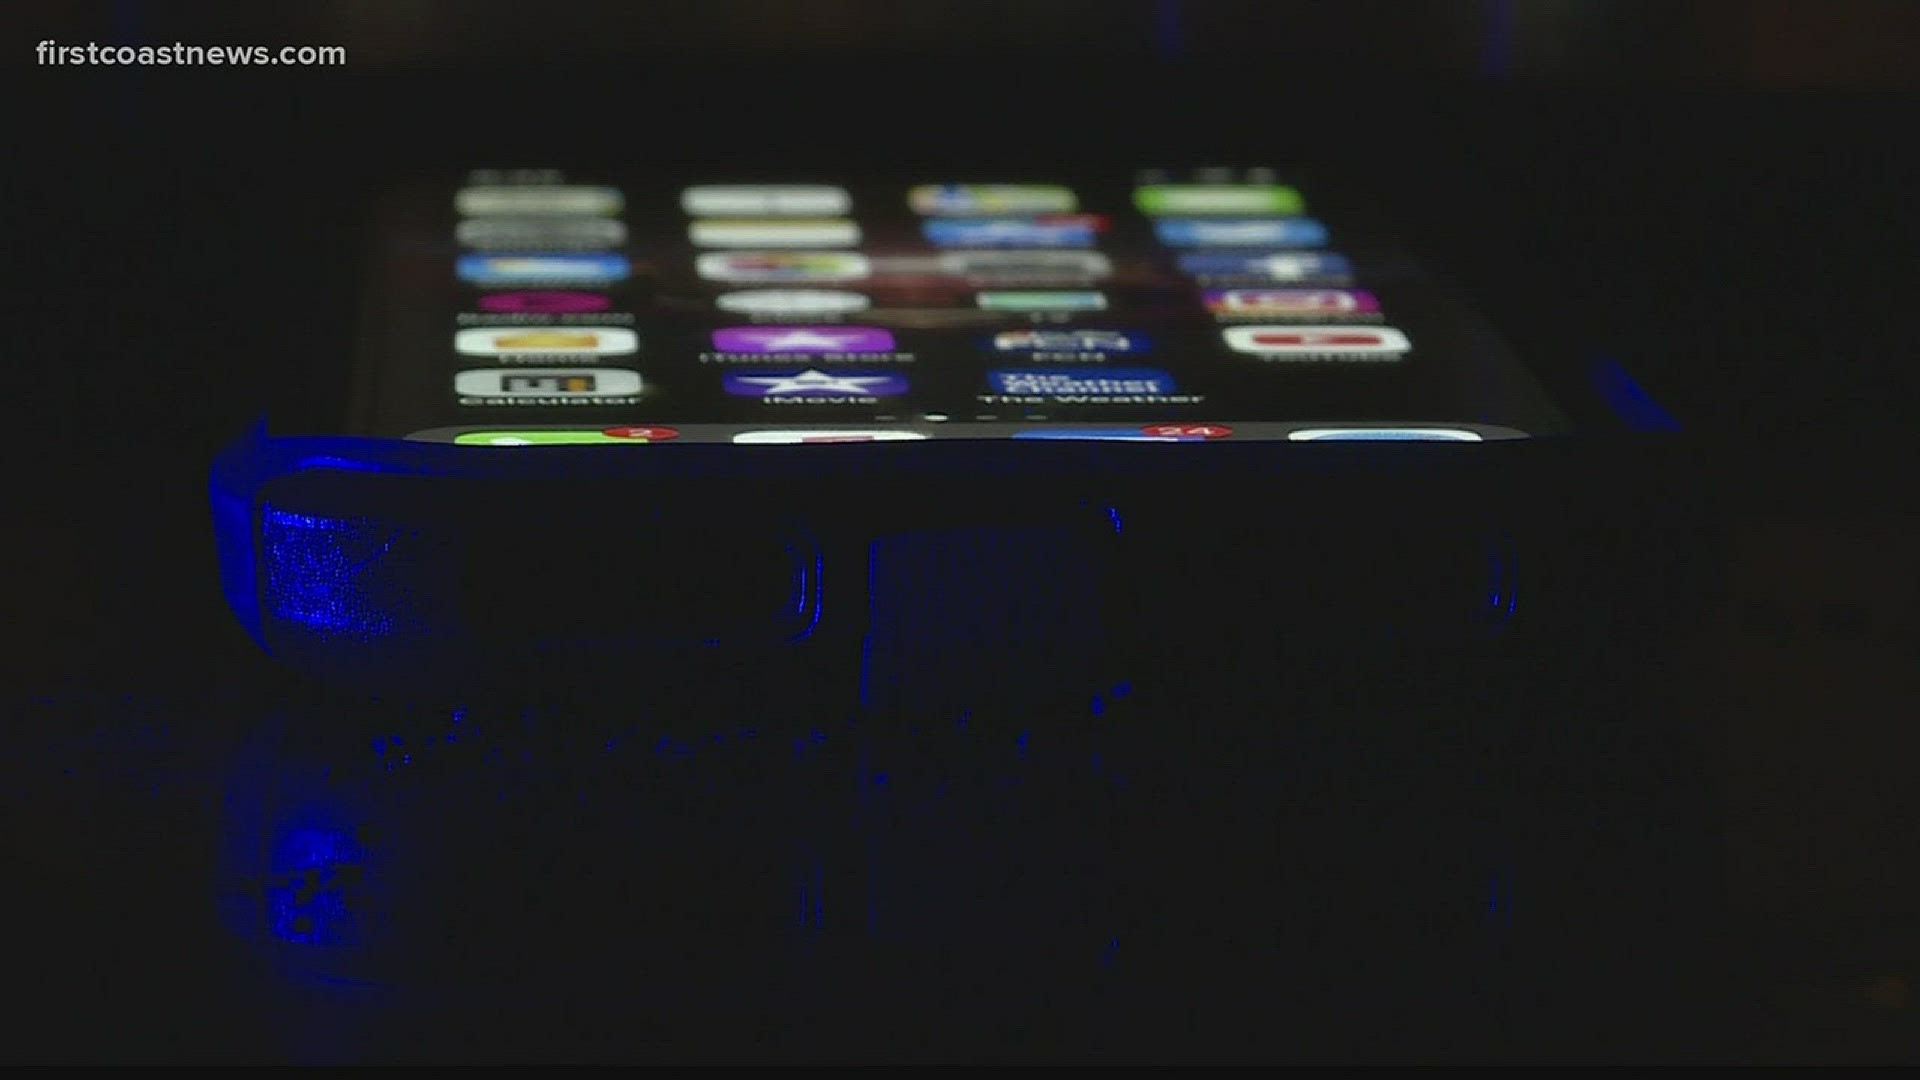 Is your smartphone controlling your life? FCN reporter Eric Alvarez breaks down device dependency.